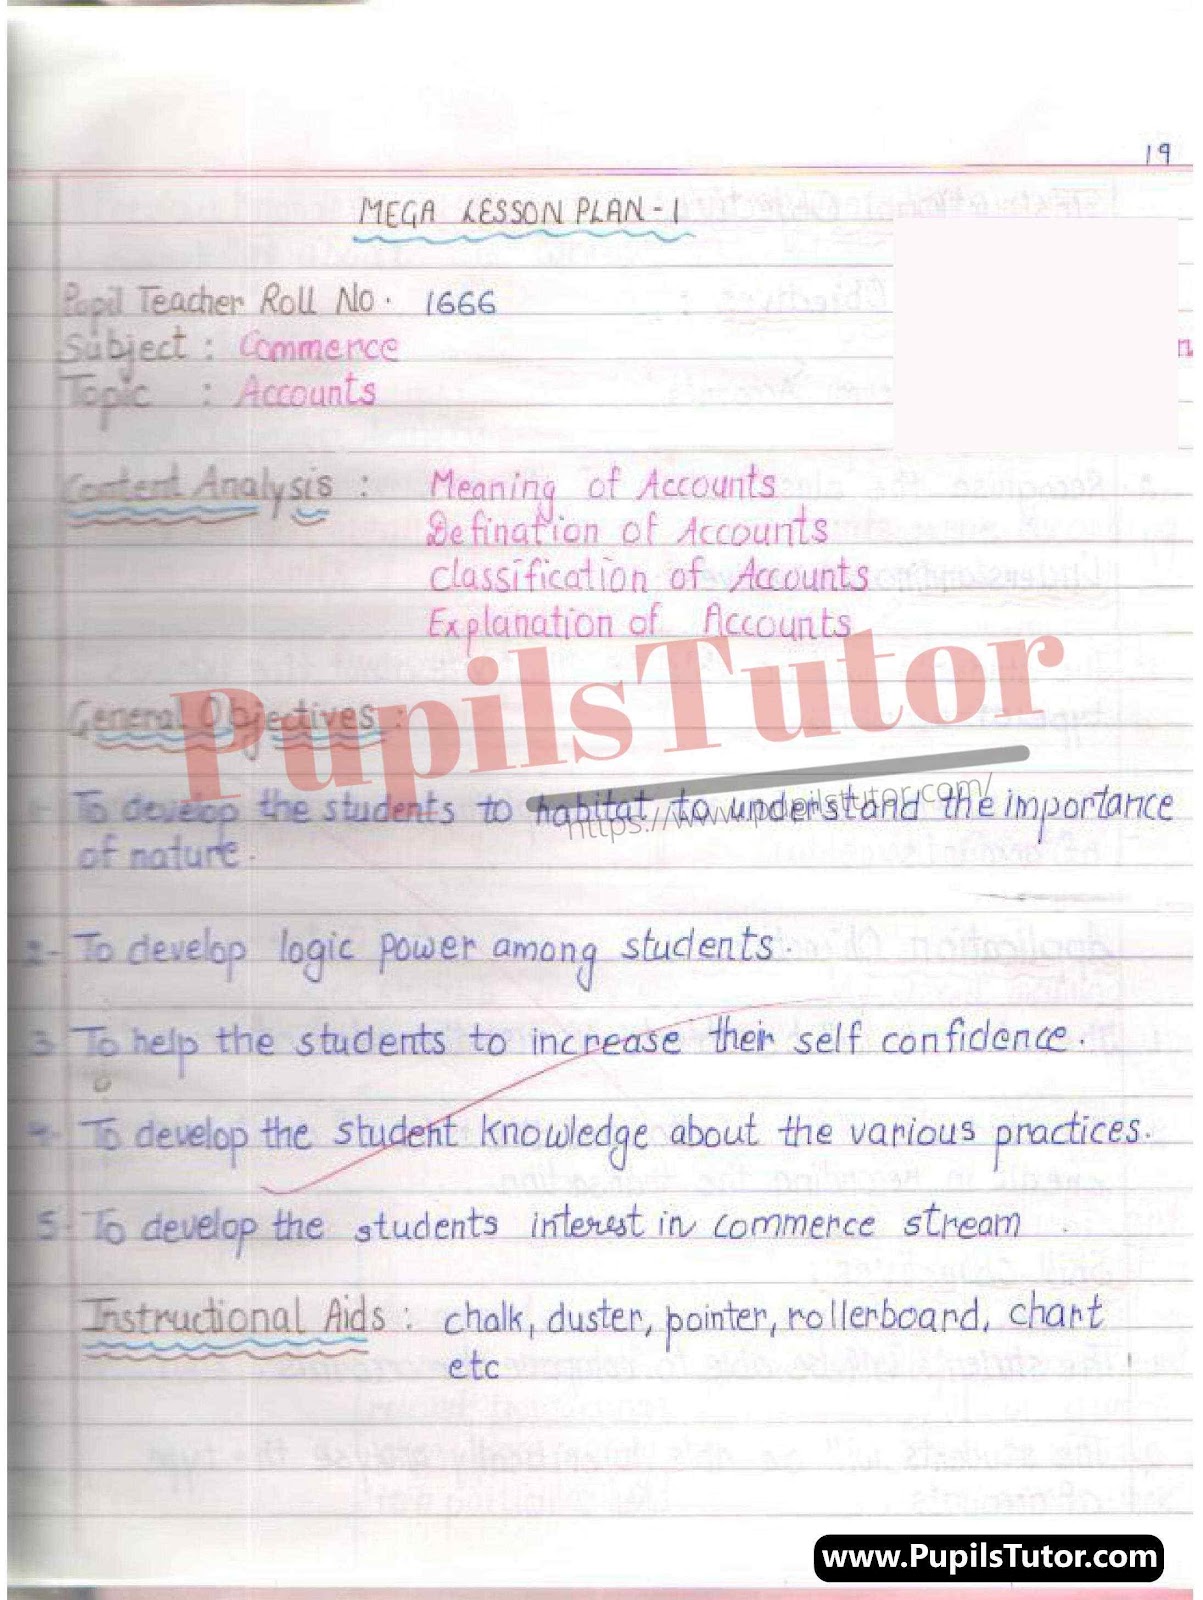 Accounts Lesson Plan – (Page And Image Number 1) – Pupils Tutor